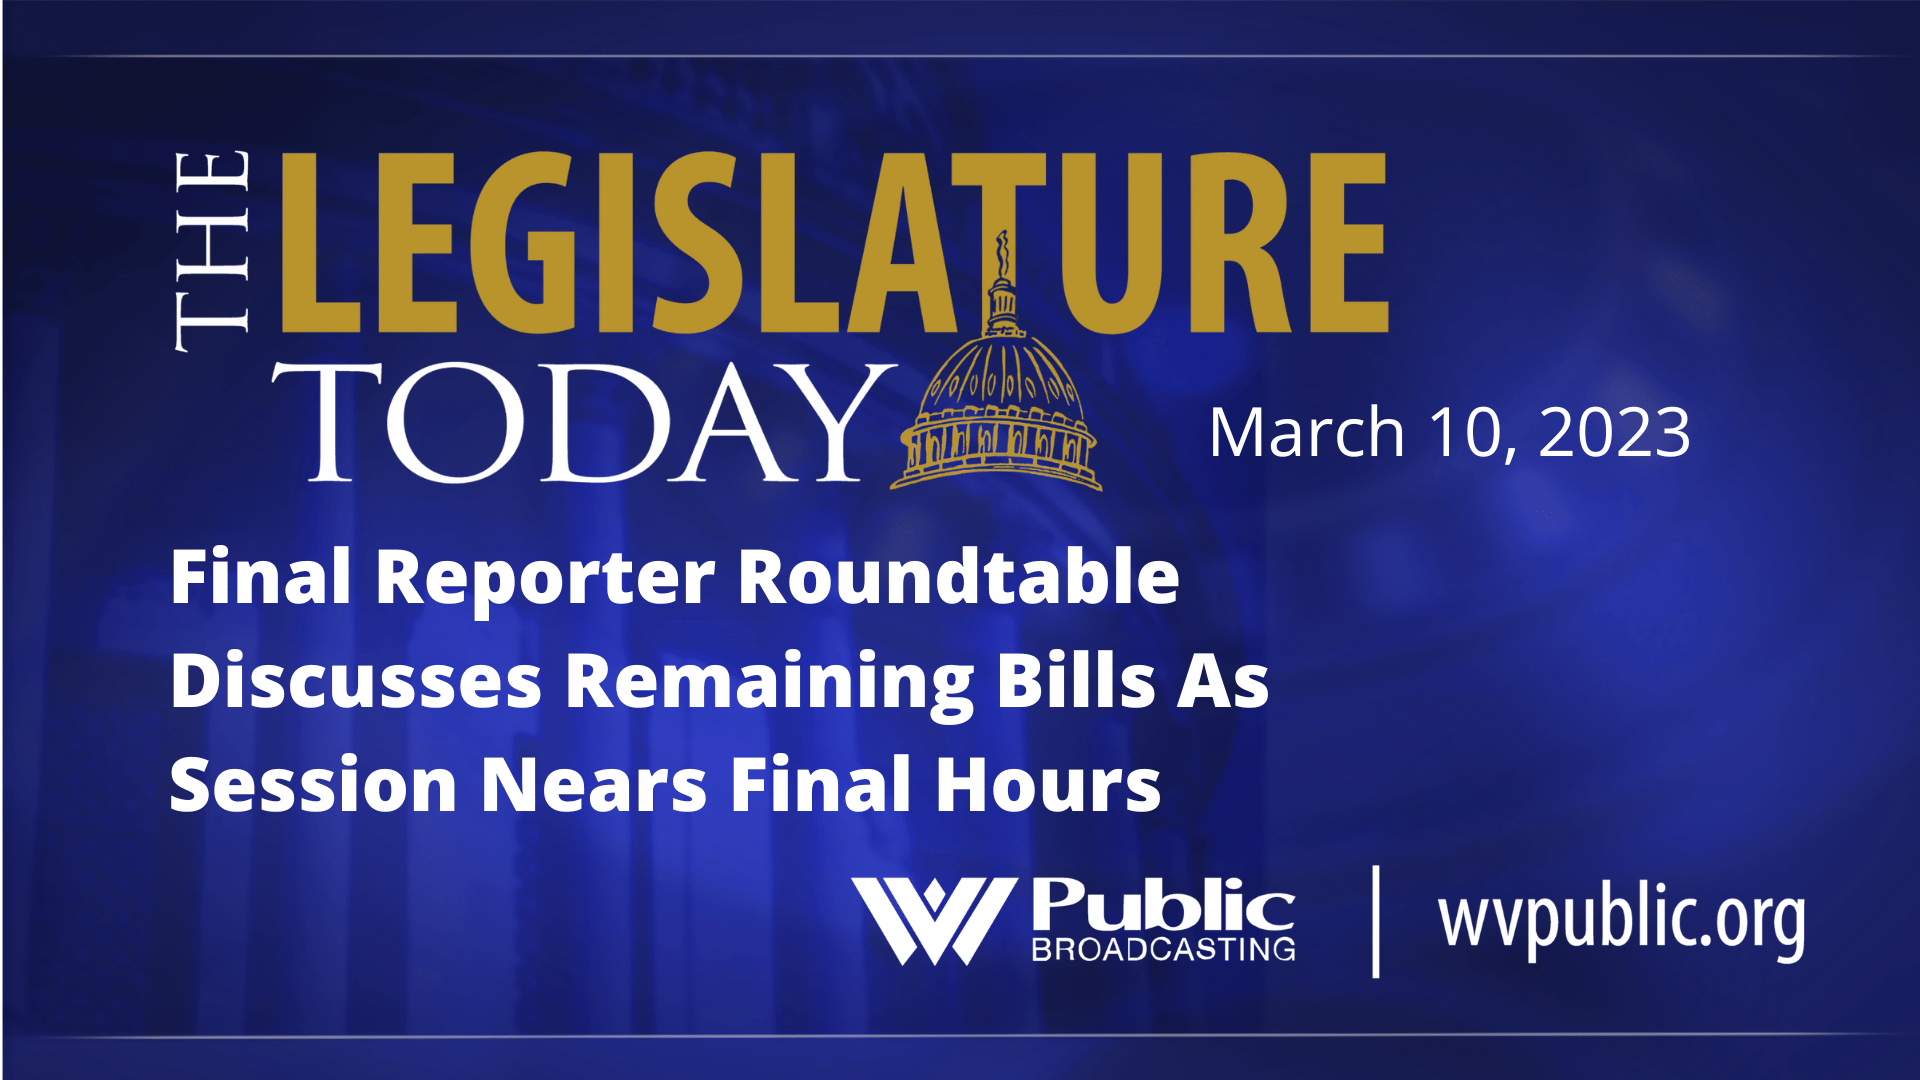 Final Reporter Roundtable Discusses Remaining Bills As Session Nears Final Hours